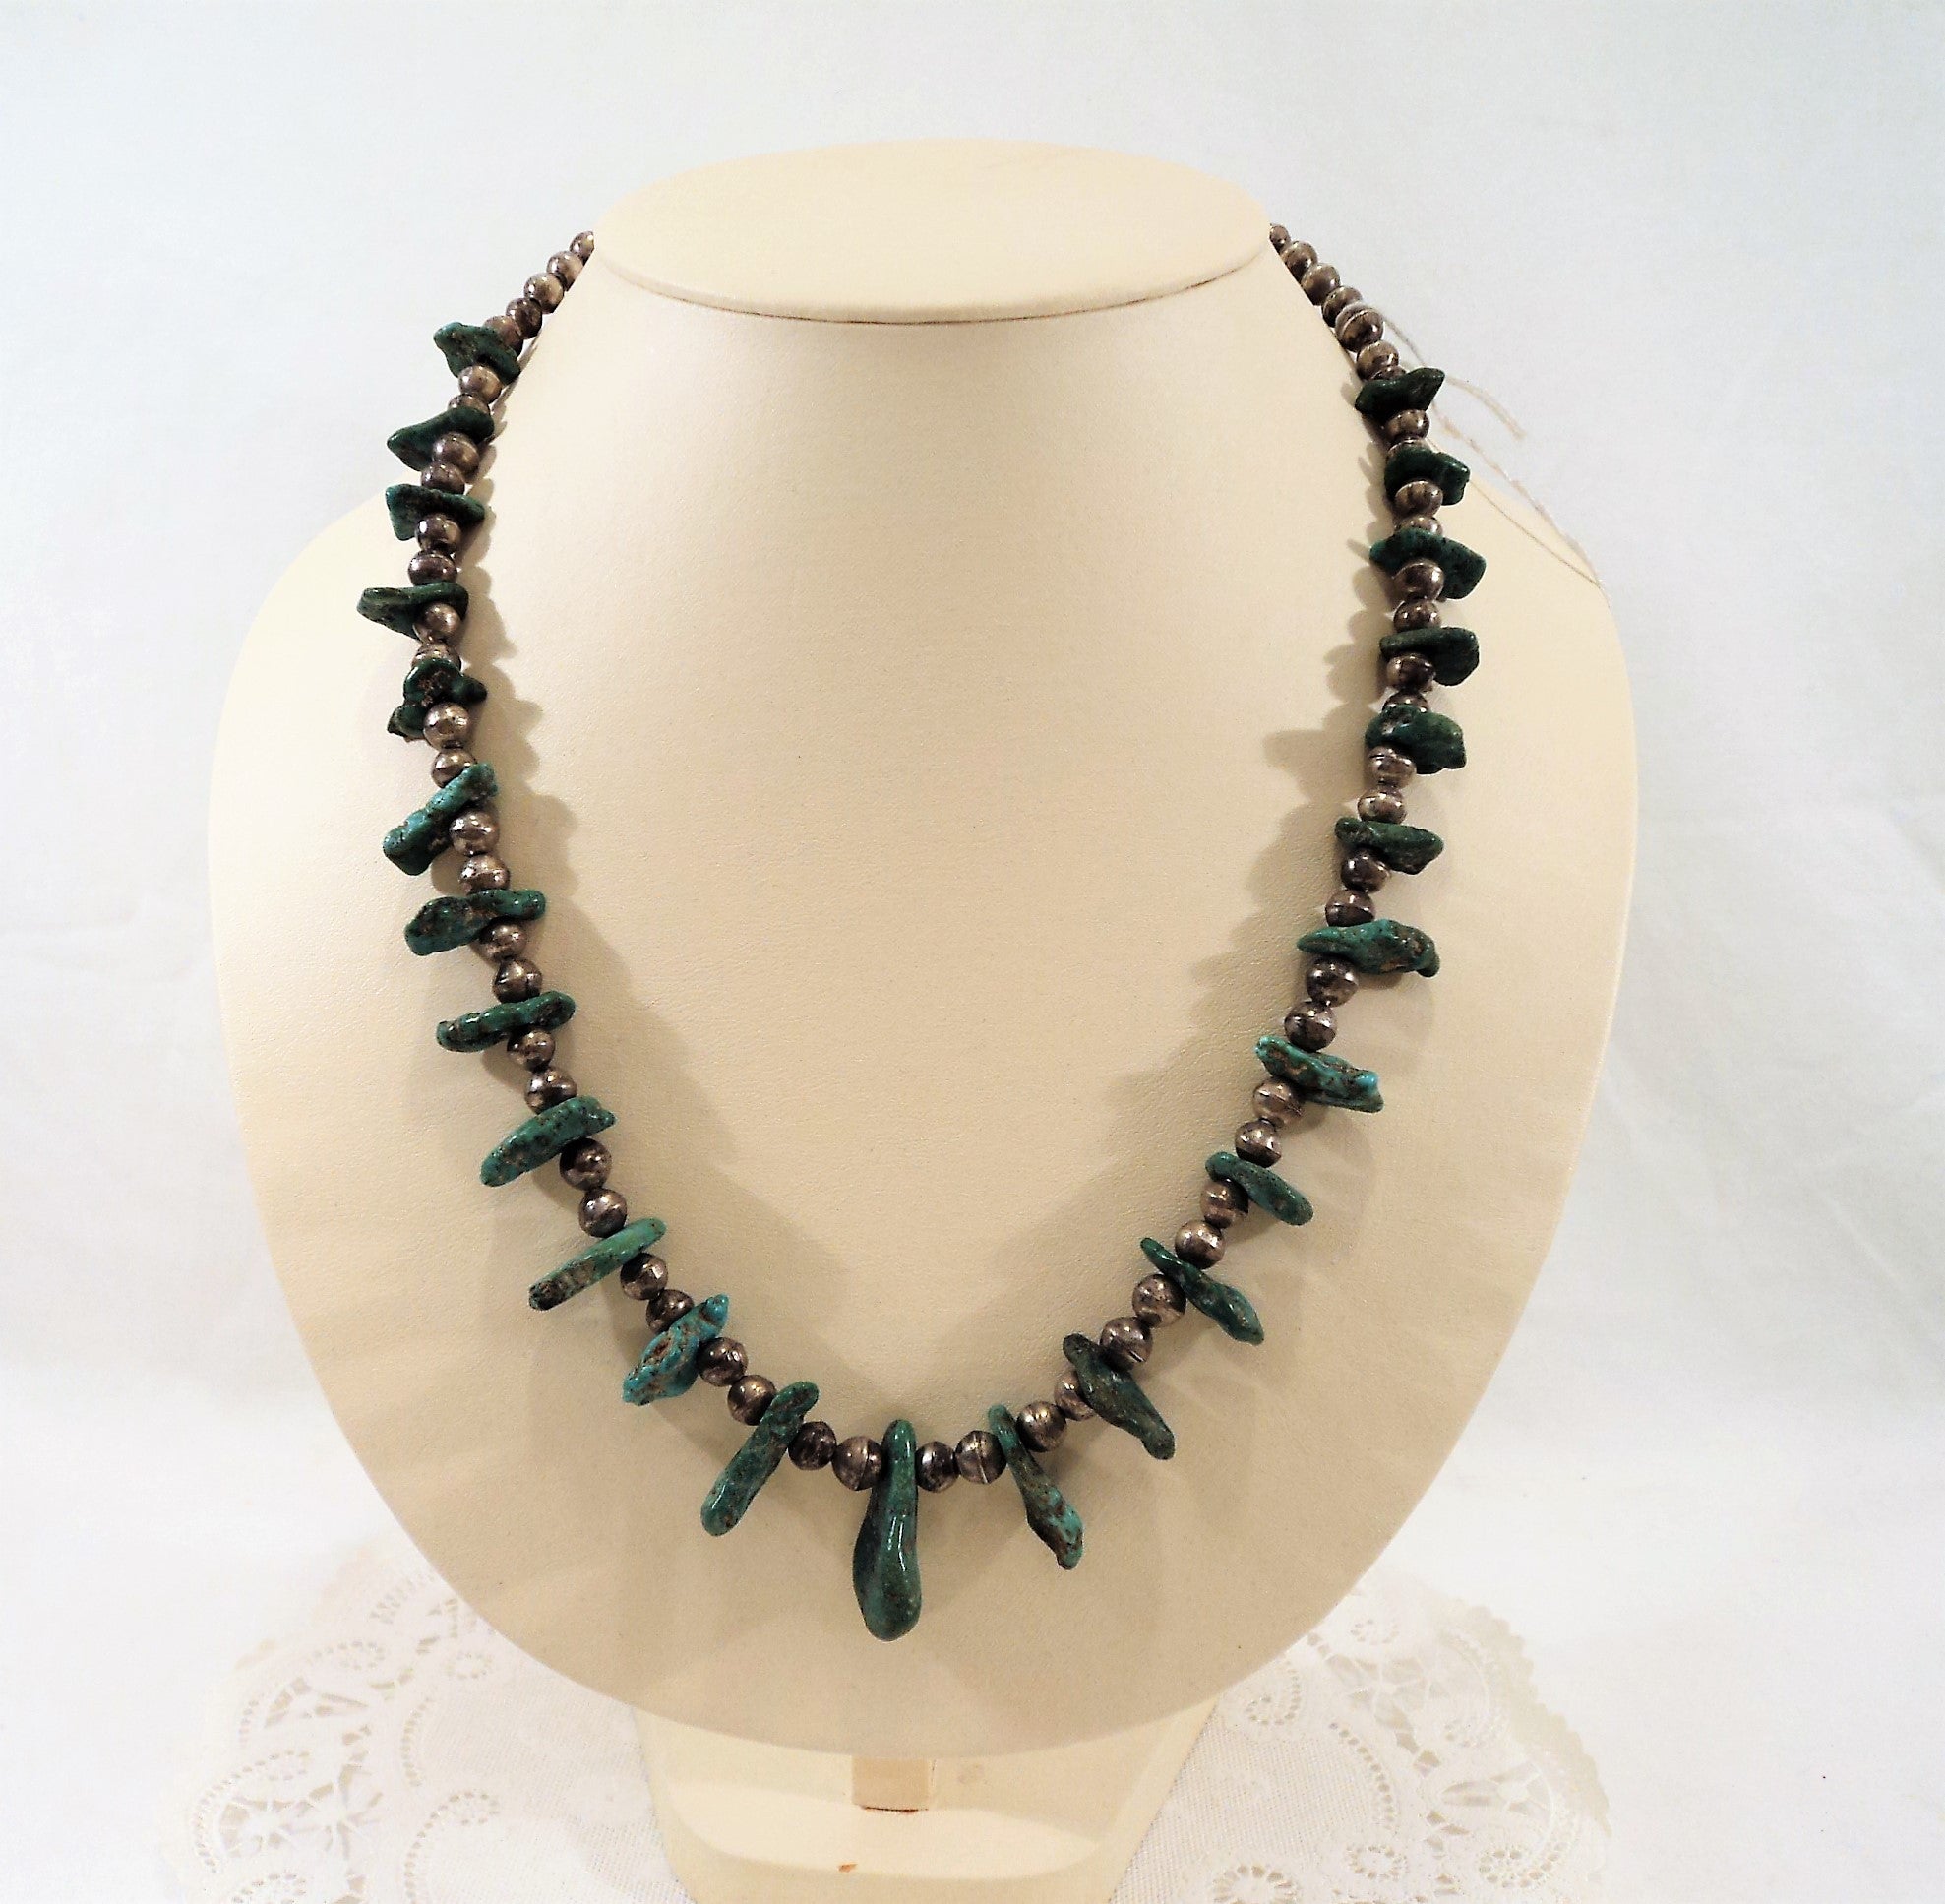 Native American Turquoise & Bench Made Silver Beads Necklace